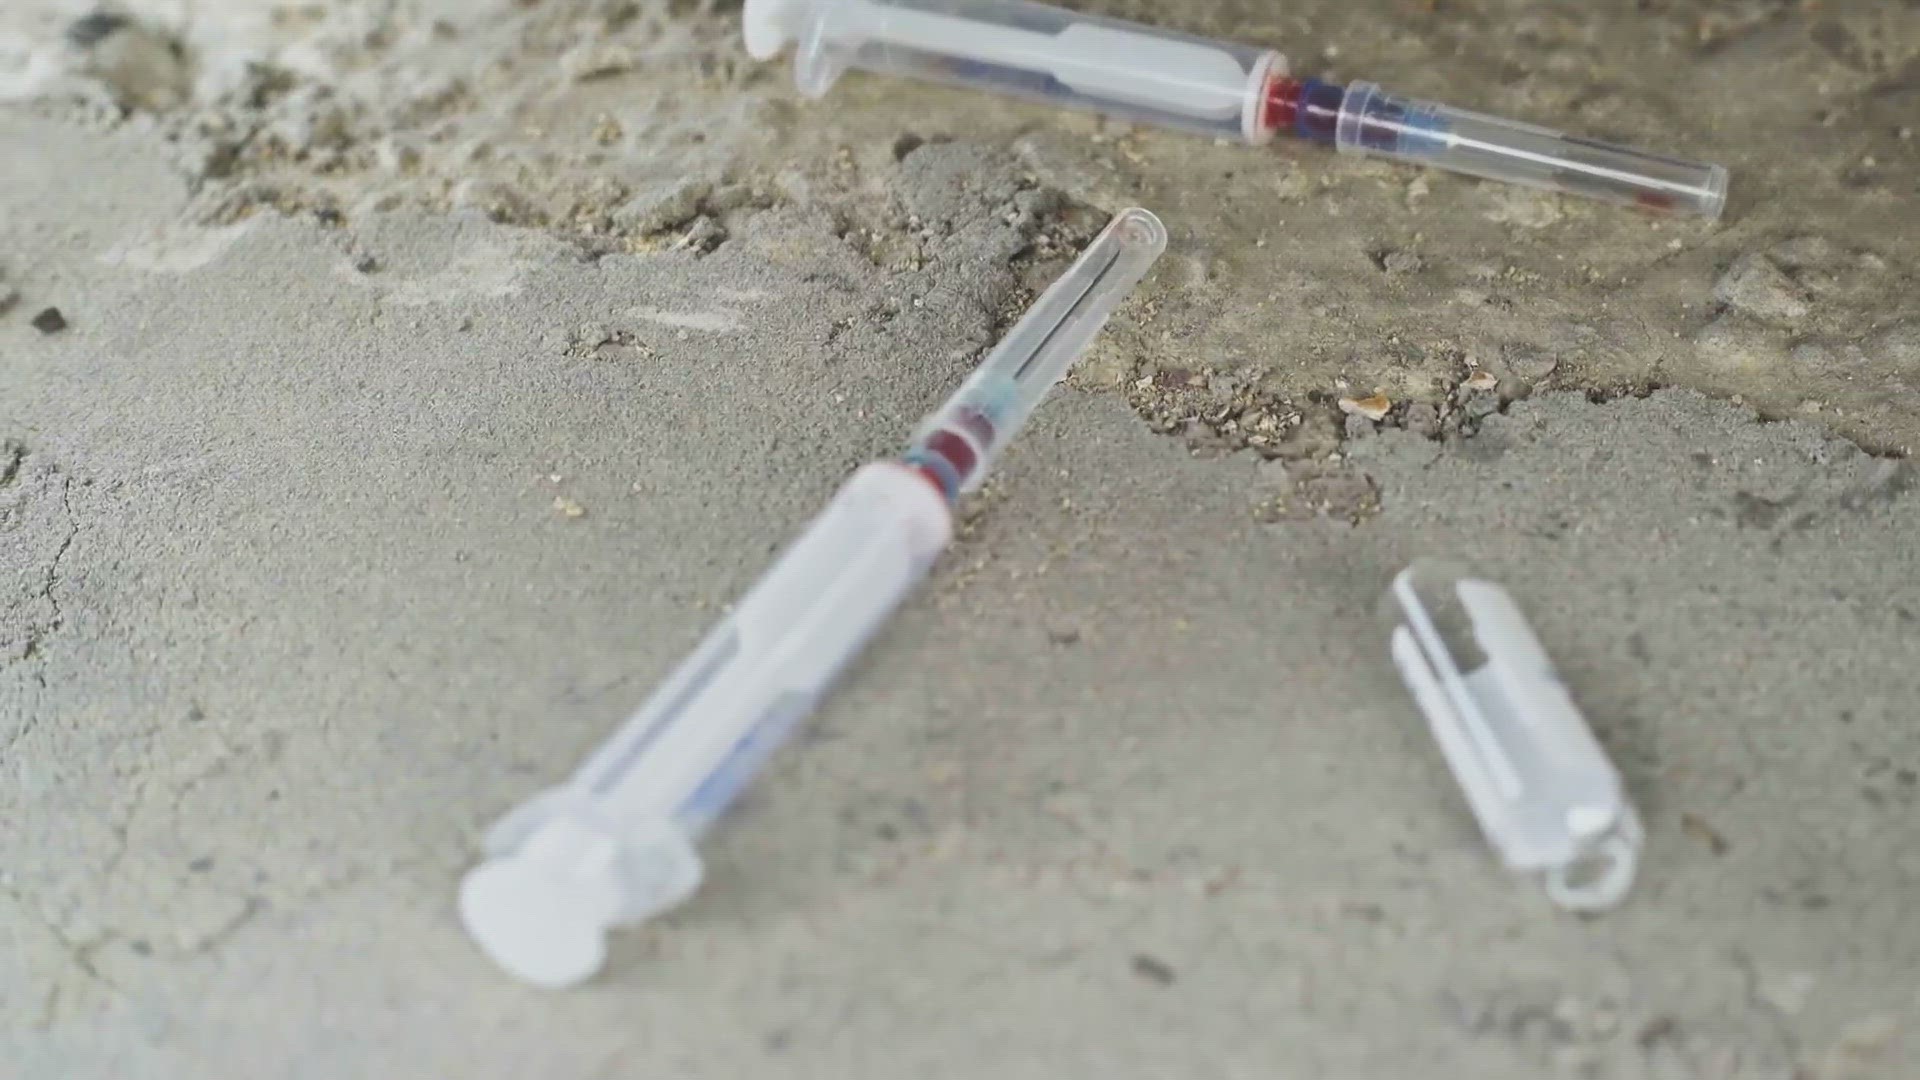 ​Placer County officials are expected to ban needle exchange programs after a plan to distribute hypodermic needles in the county was proposed.